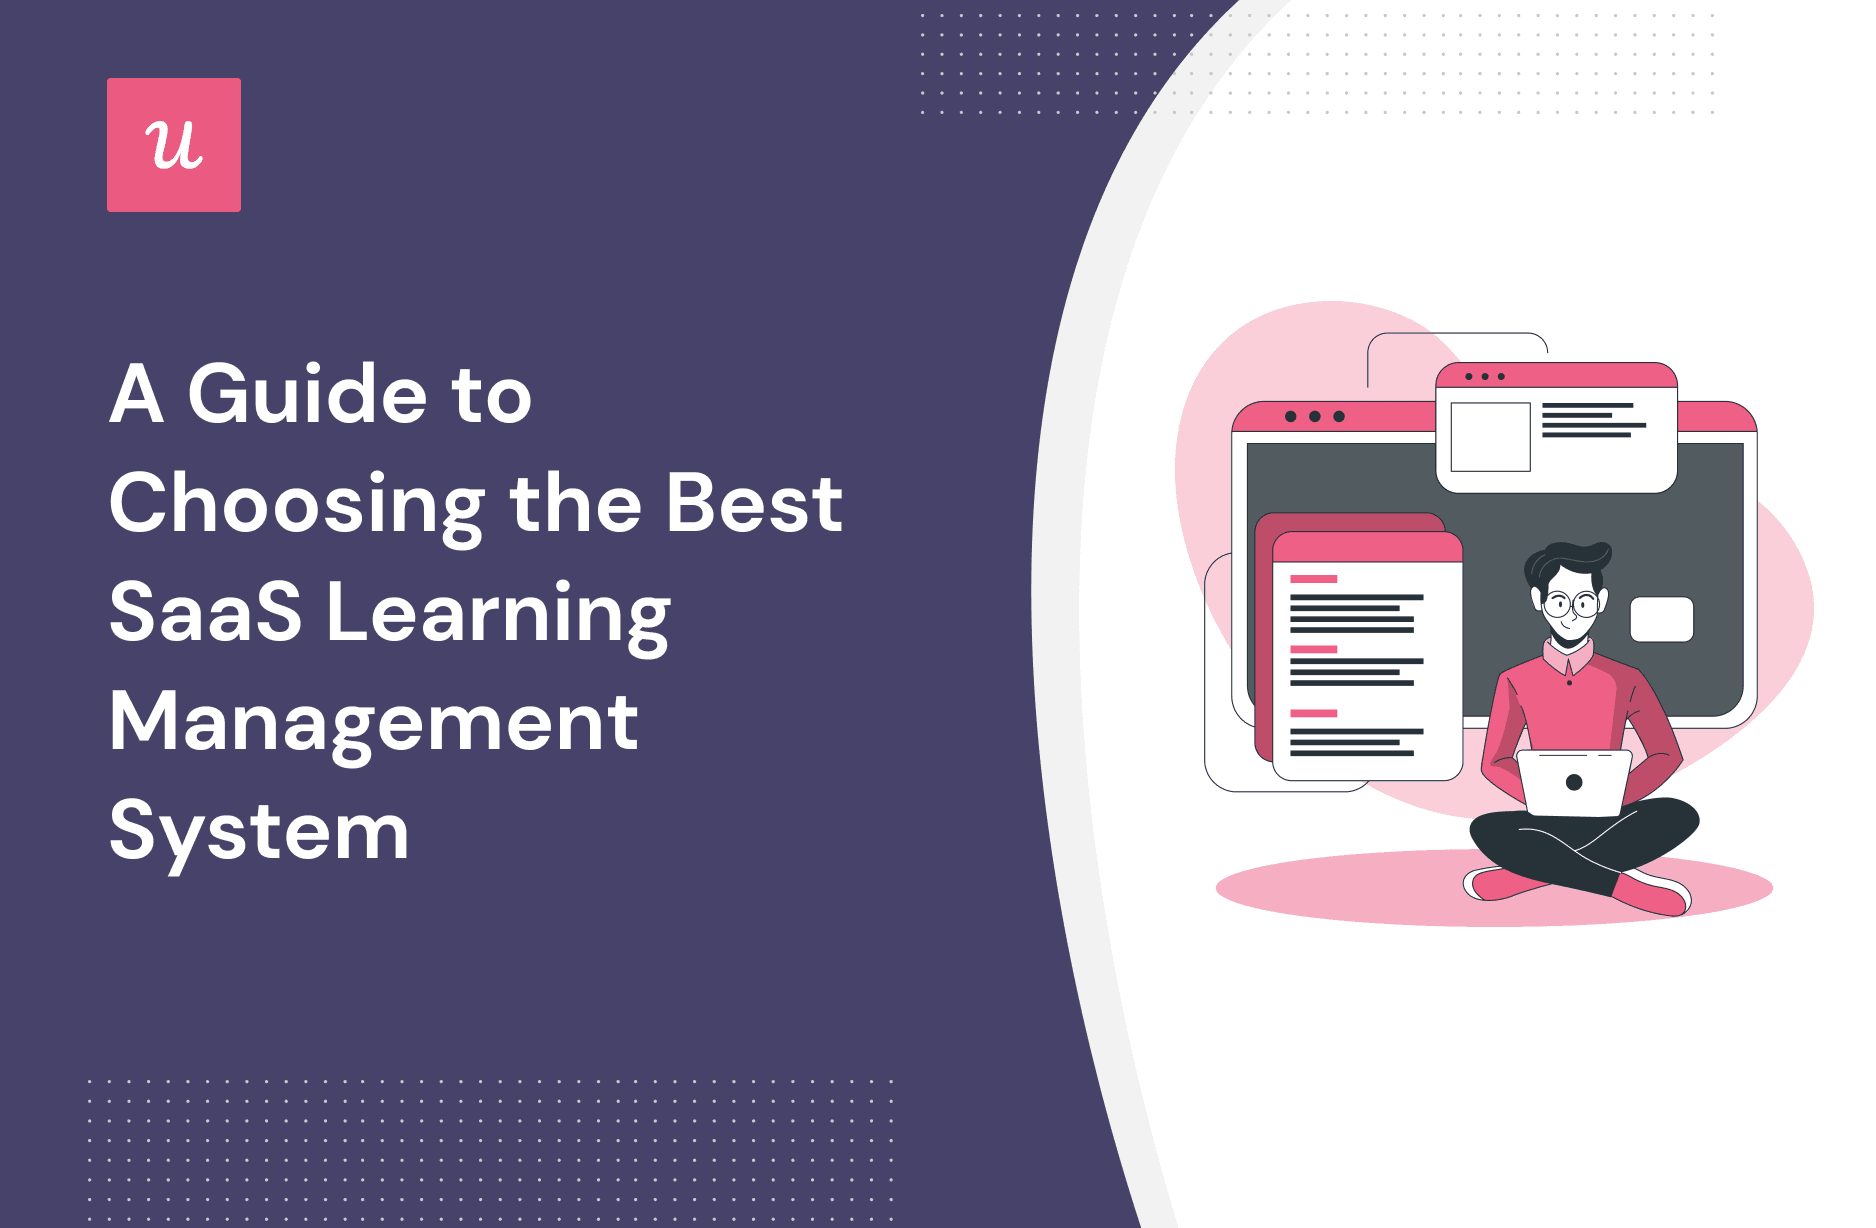 A Guide to Choosing the Best SaaS Learning Management System cover